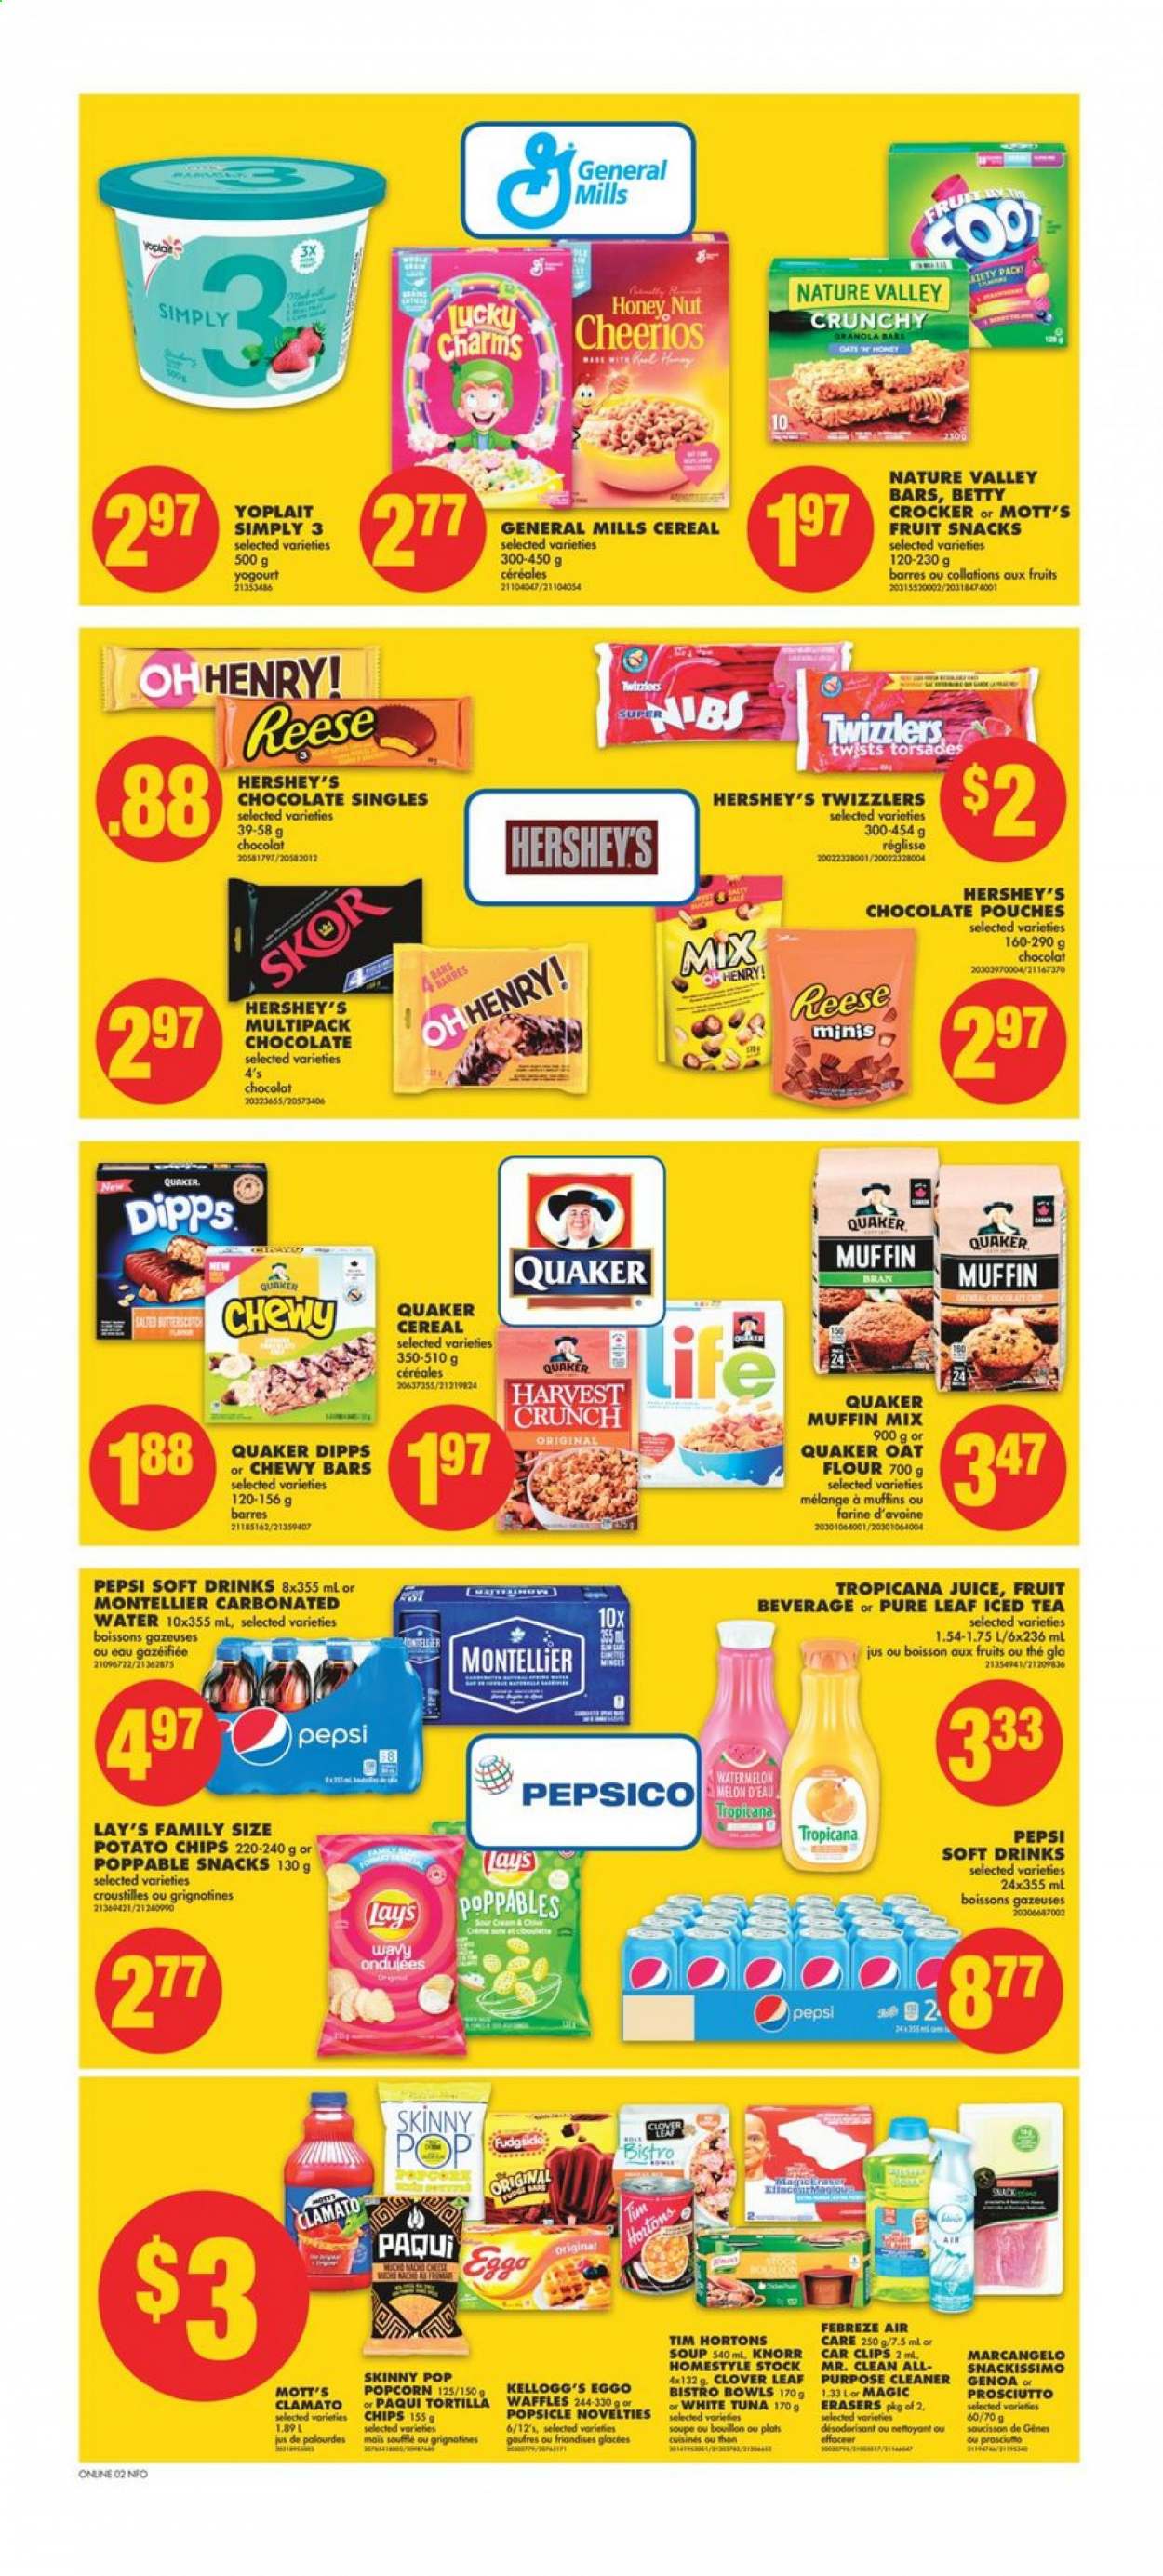 thumbnail - No Frills Flyer - May 13, 2021 - May 19, 2021 - Sales products - waffles, muffin mix, watermelon, Mott's, tuna, soup, Quaker, Clover, Yoplait, sour cream, Hershey's, chocolate, Kellogg's, fruit snack, tortilla chips, potato chips, Lay’s, popcorn, Skinny Pop, oats, cereals, Cheerios, Nature Valley, Pepsi, juice, ice tea, Clamato, soft drink, Pure Leaf, L'Or, Febreze, cleaner, Knorr, chips. Page 7.